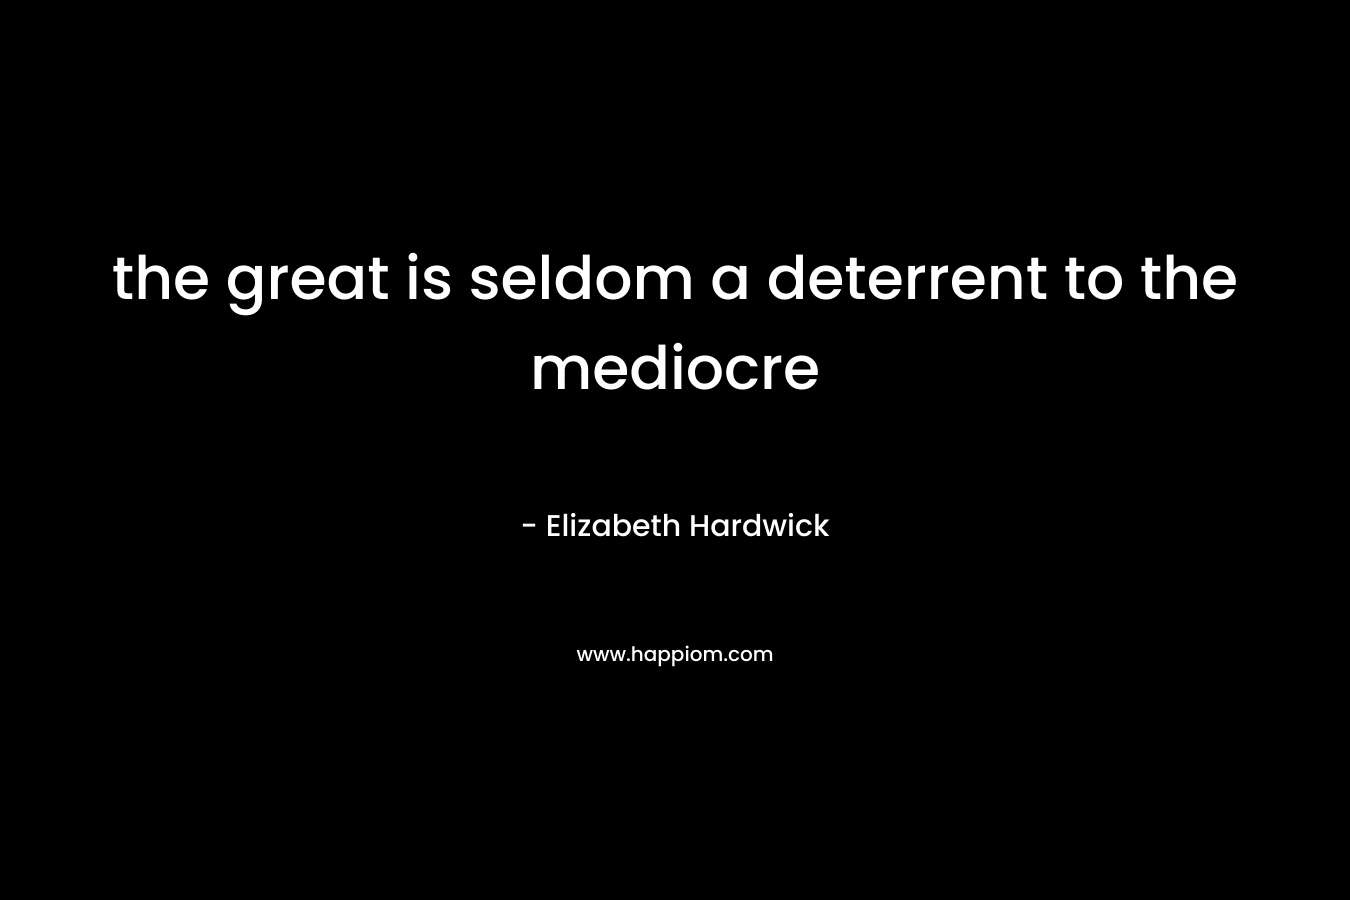 the great is seldom a deterrent to the mediocre